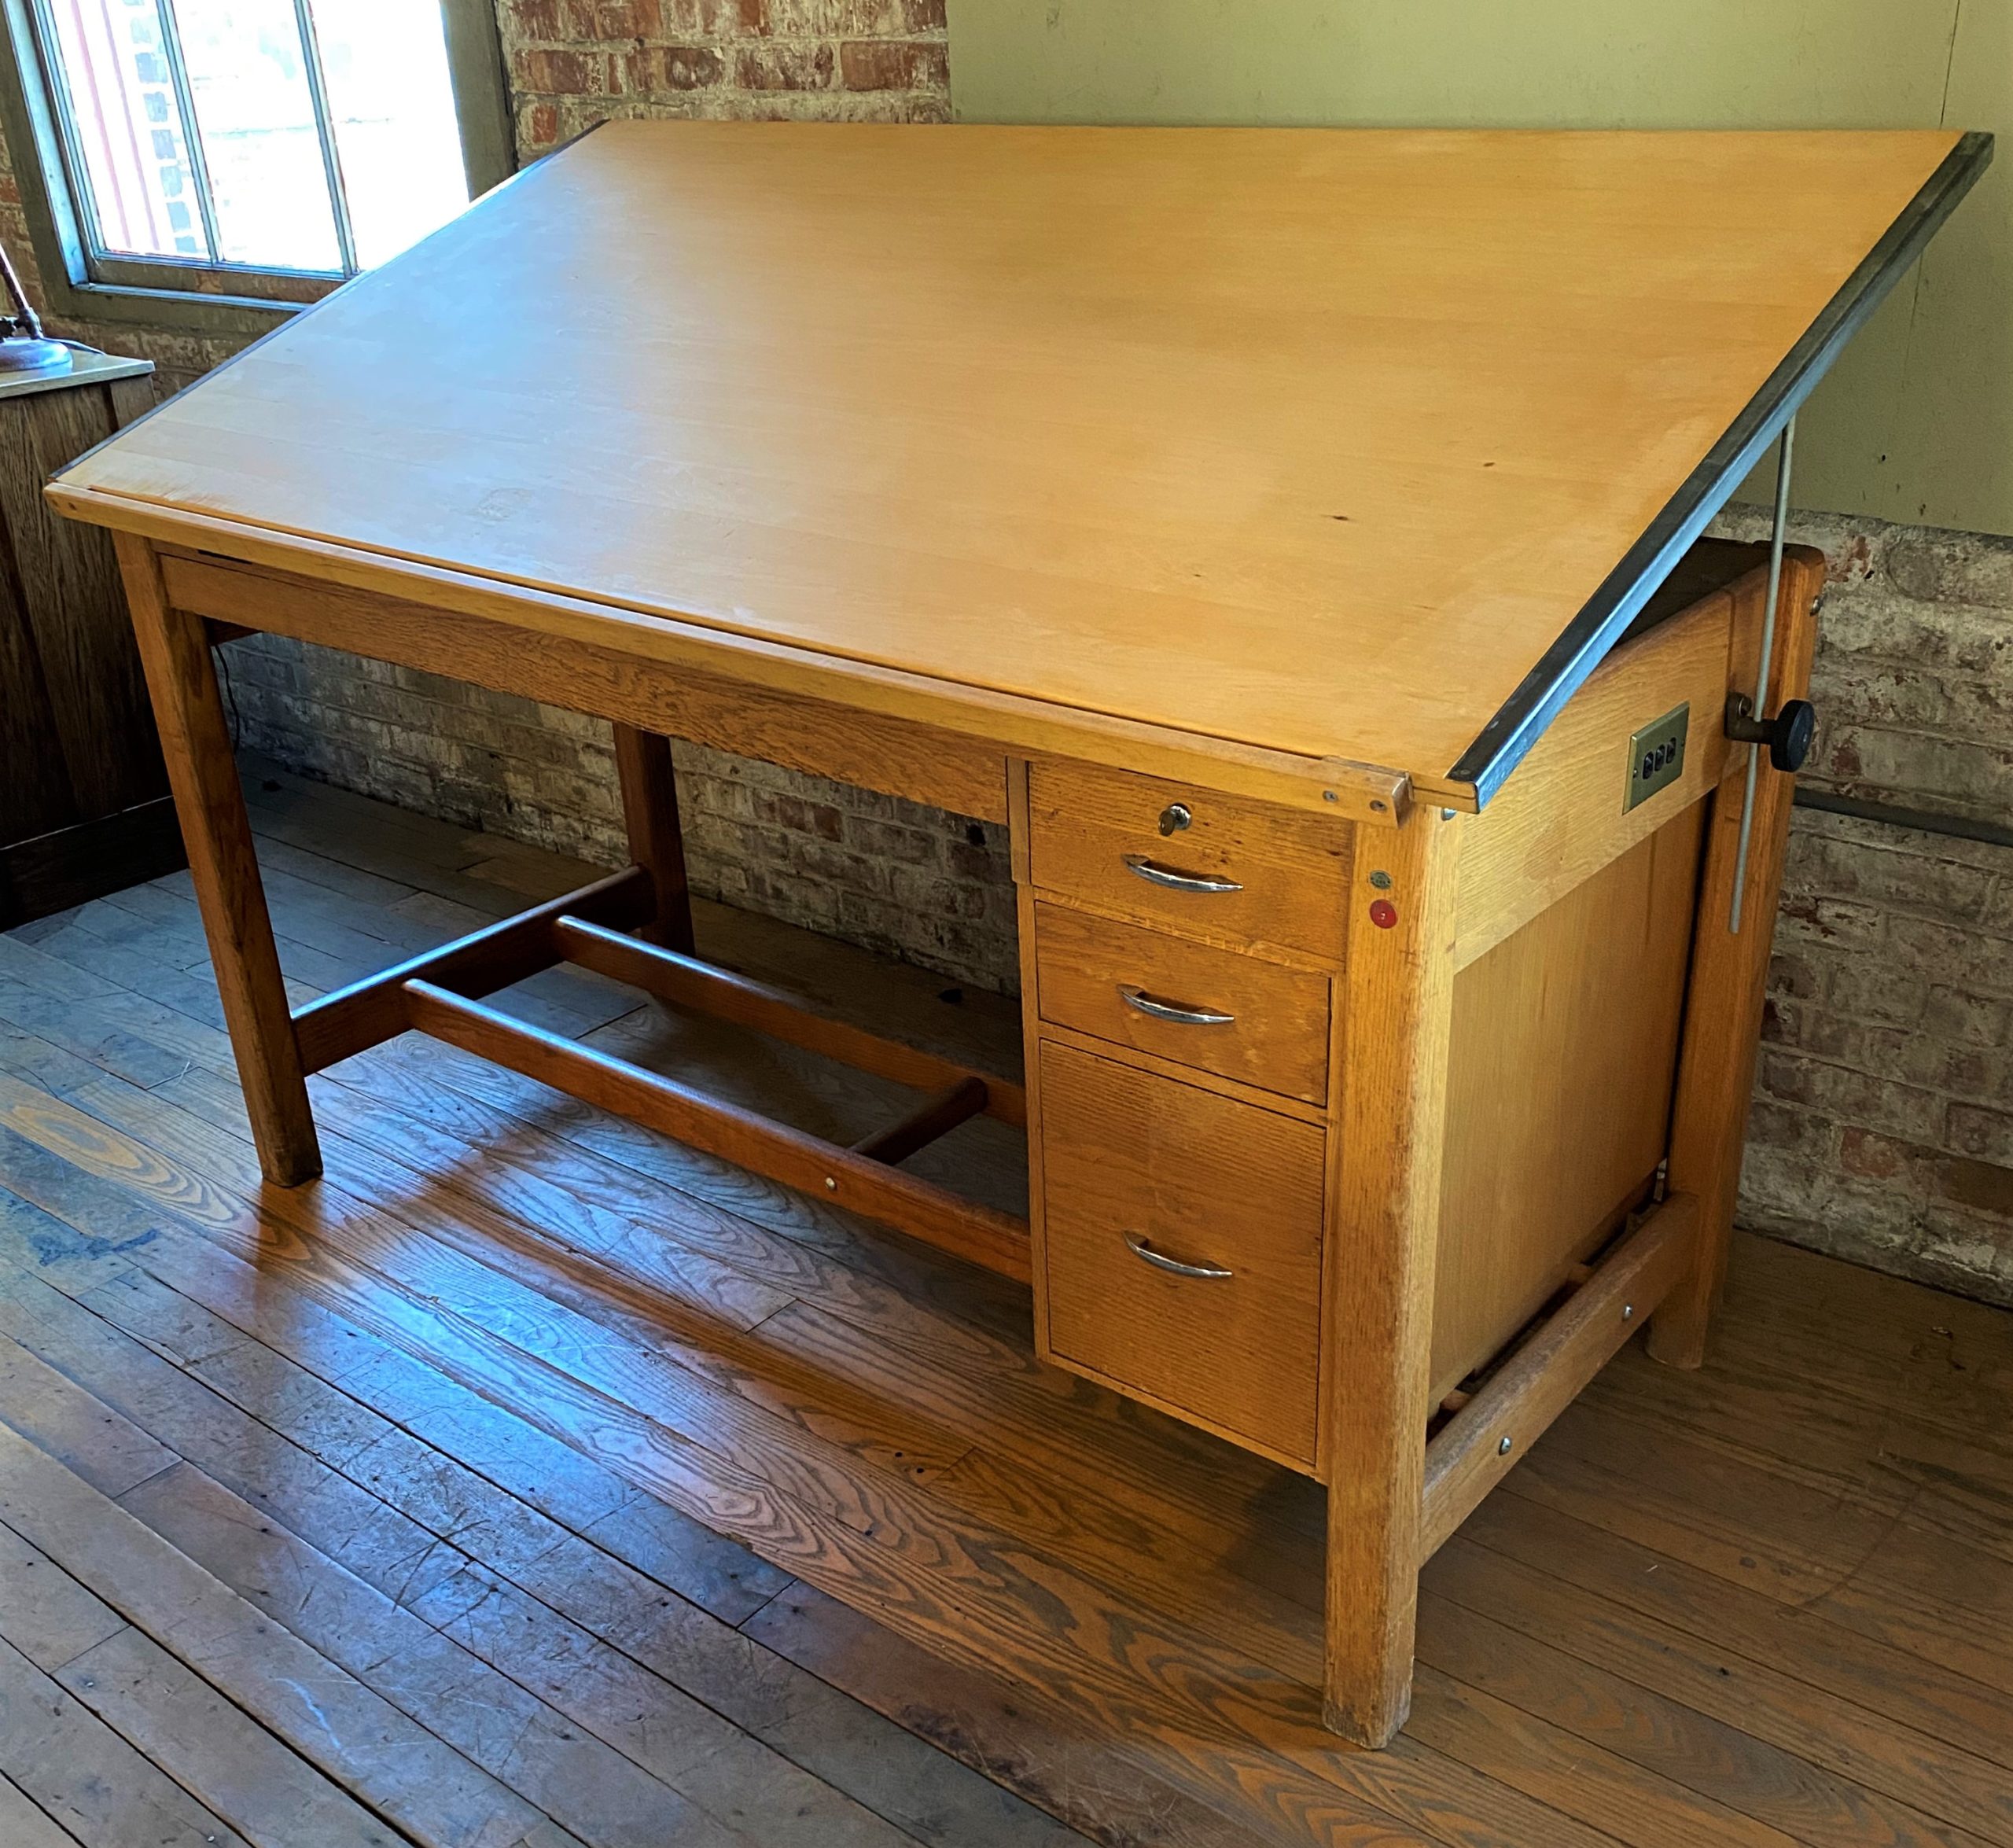 Vintage Oak and Maple drafting table w/ drafting machine - Antiques &  Collectibles - Tallahassee, Florida, Facebook Marketplace